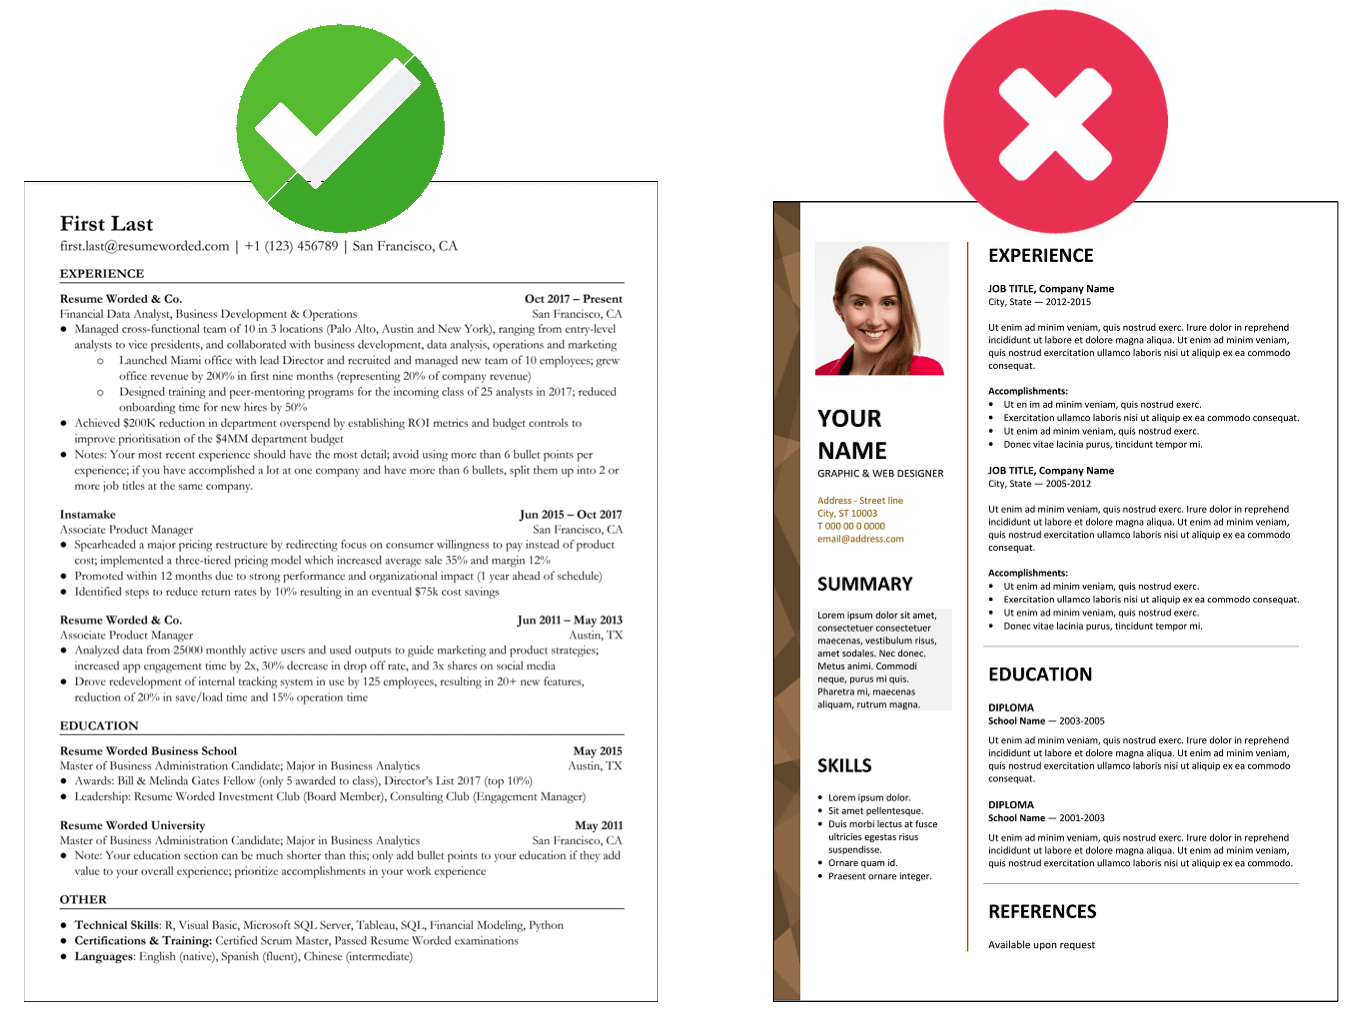 Good use of space - Data Analyst Resume